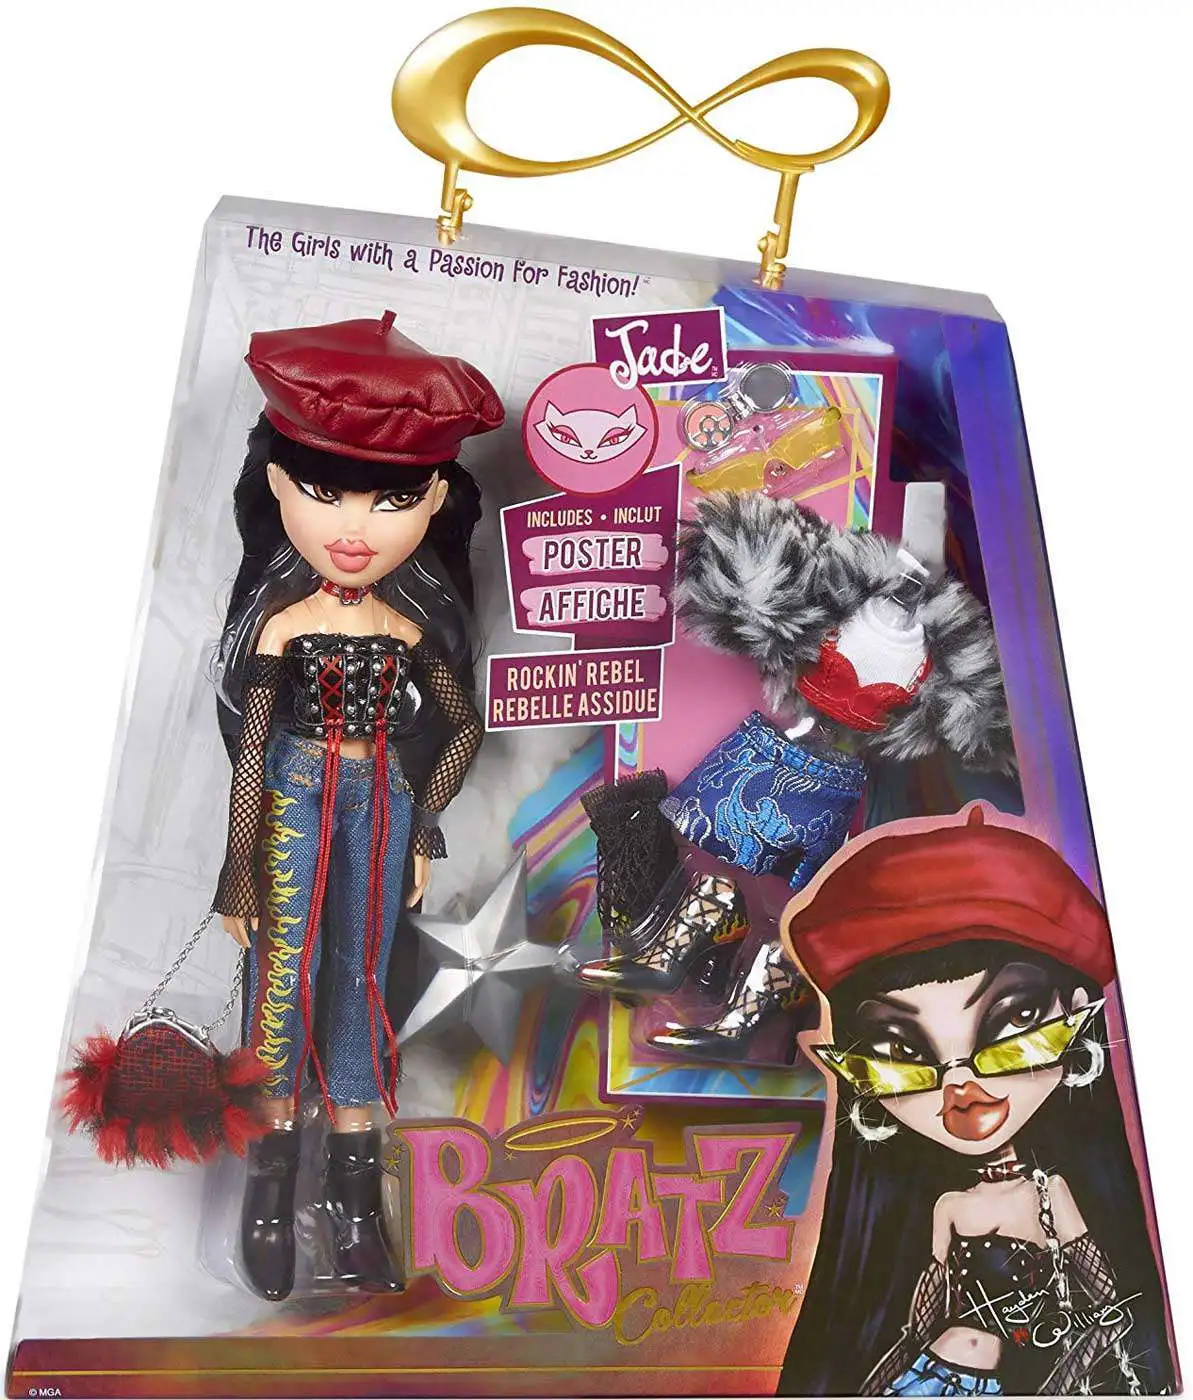 Bratz Girls Nite Out Cloe Ultimate Collectible Doll! Check Out Our Store!!